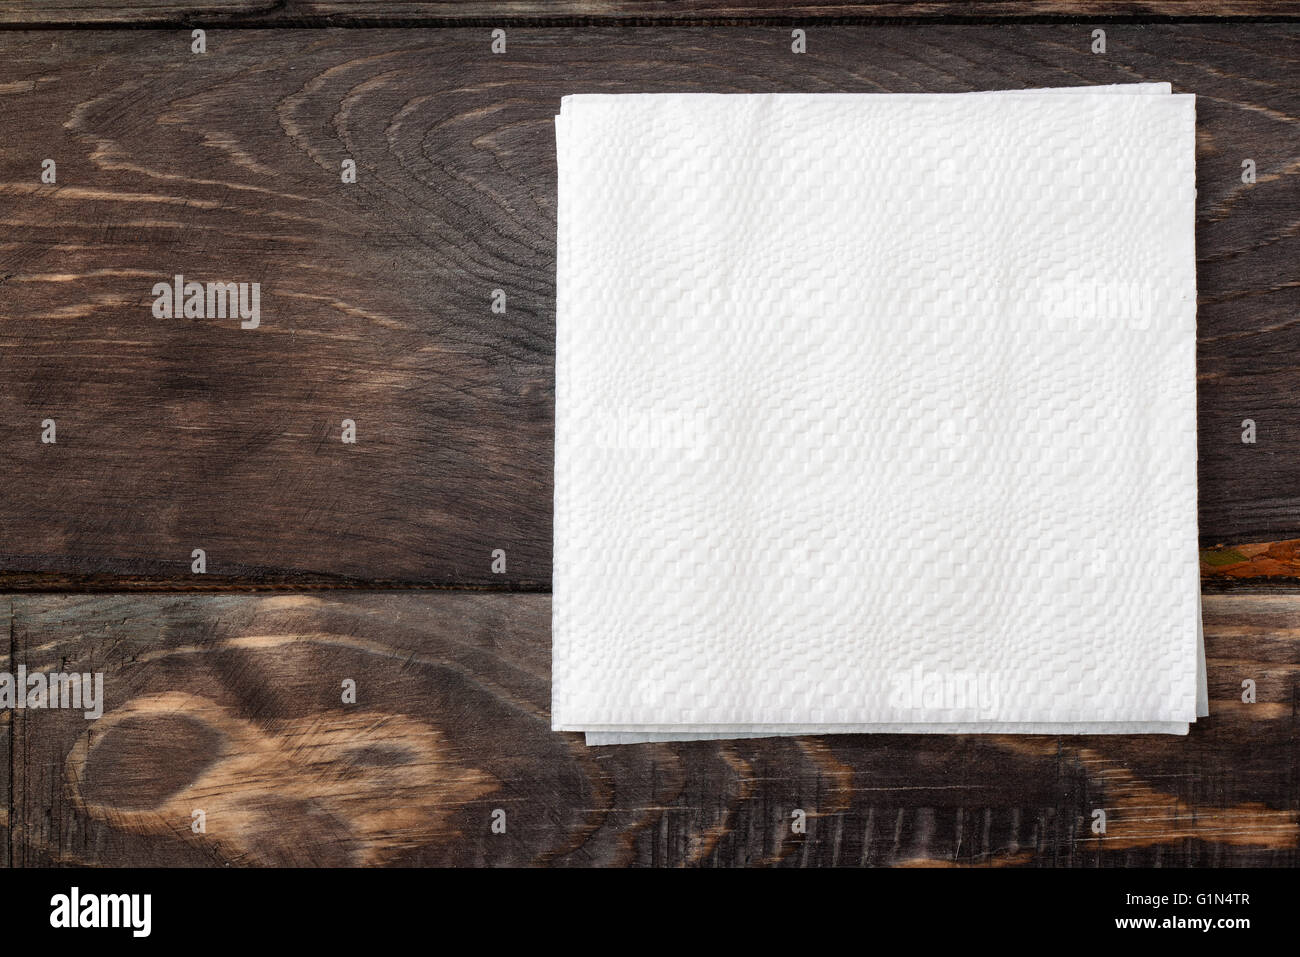 White paper napkins on dark wooden table surface Stock Photo